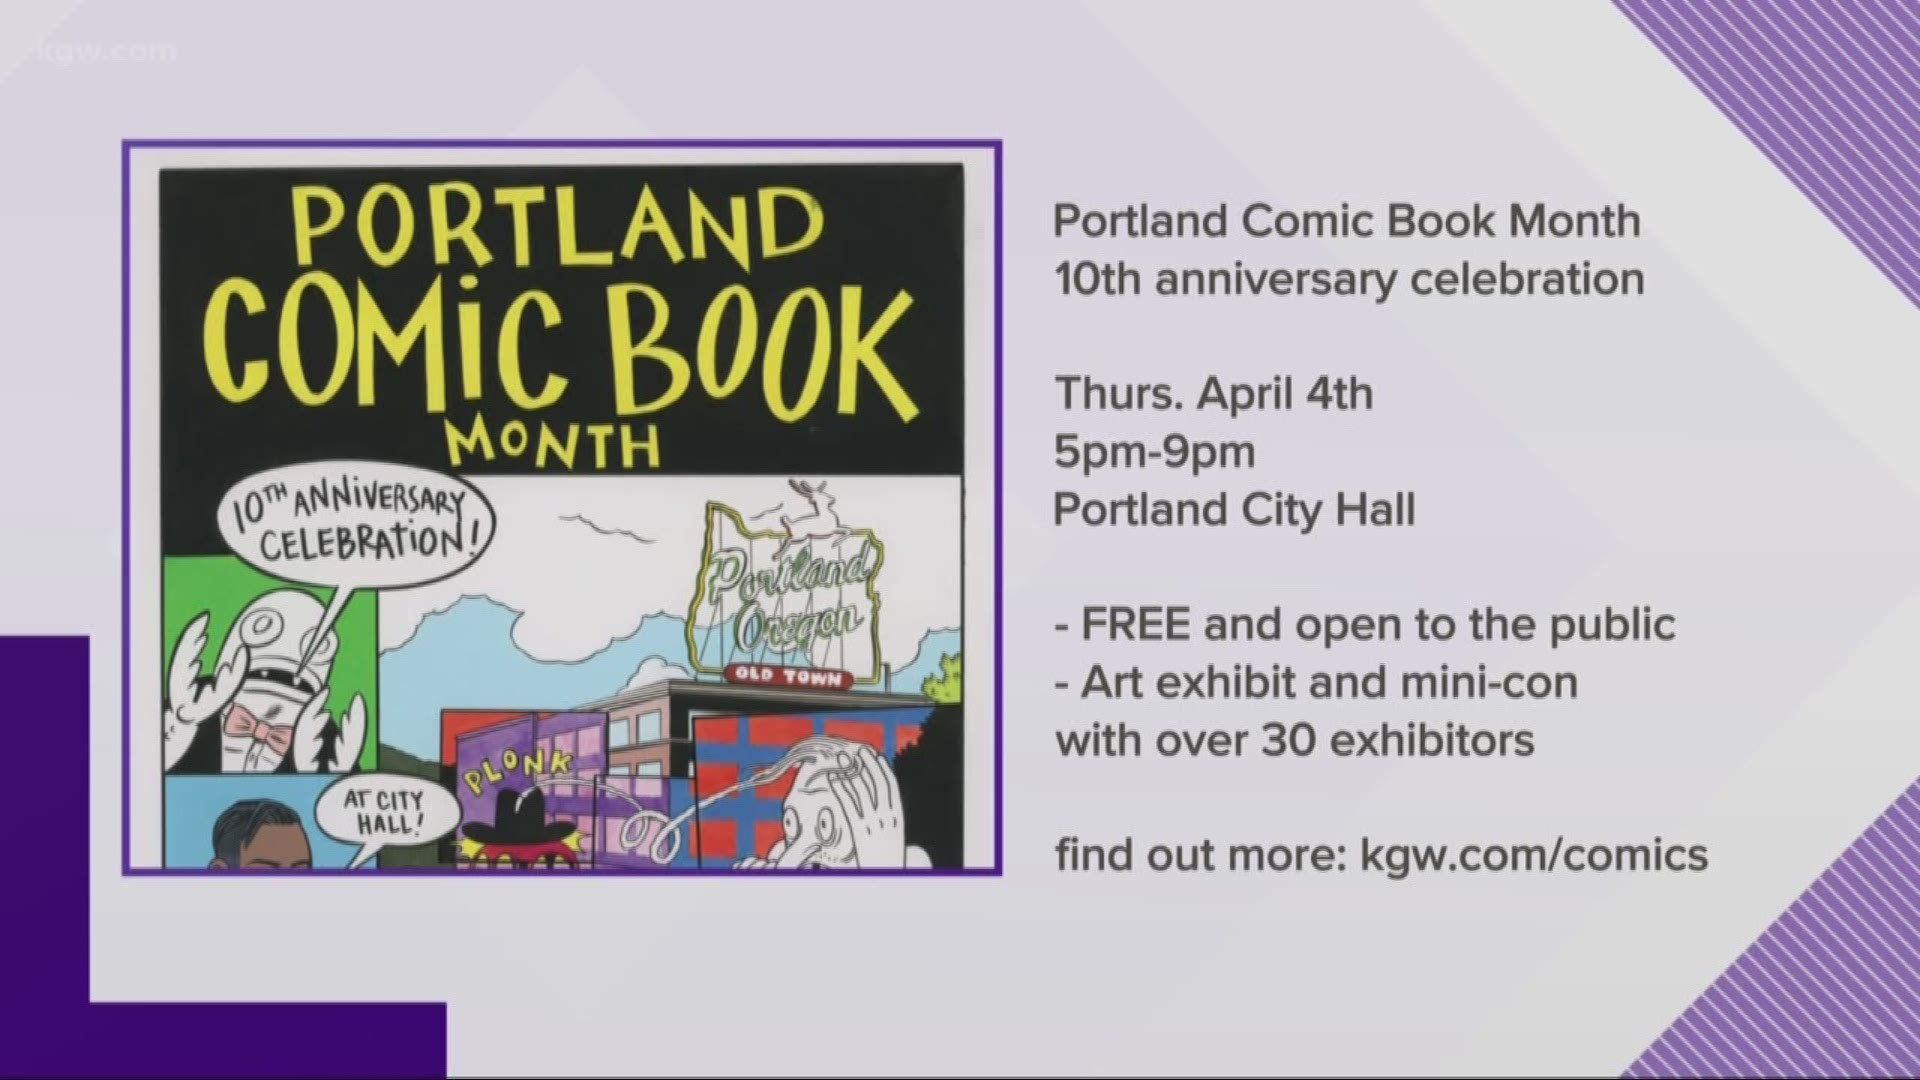 April is the 10th anniversary of Portland Comic Book Month and the city is celebrating with a mini comic con at City Hall on Thursday, April 4 and events all month long.